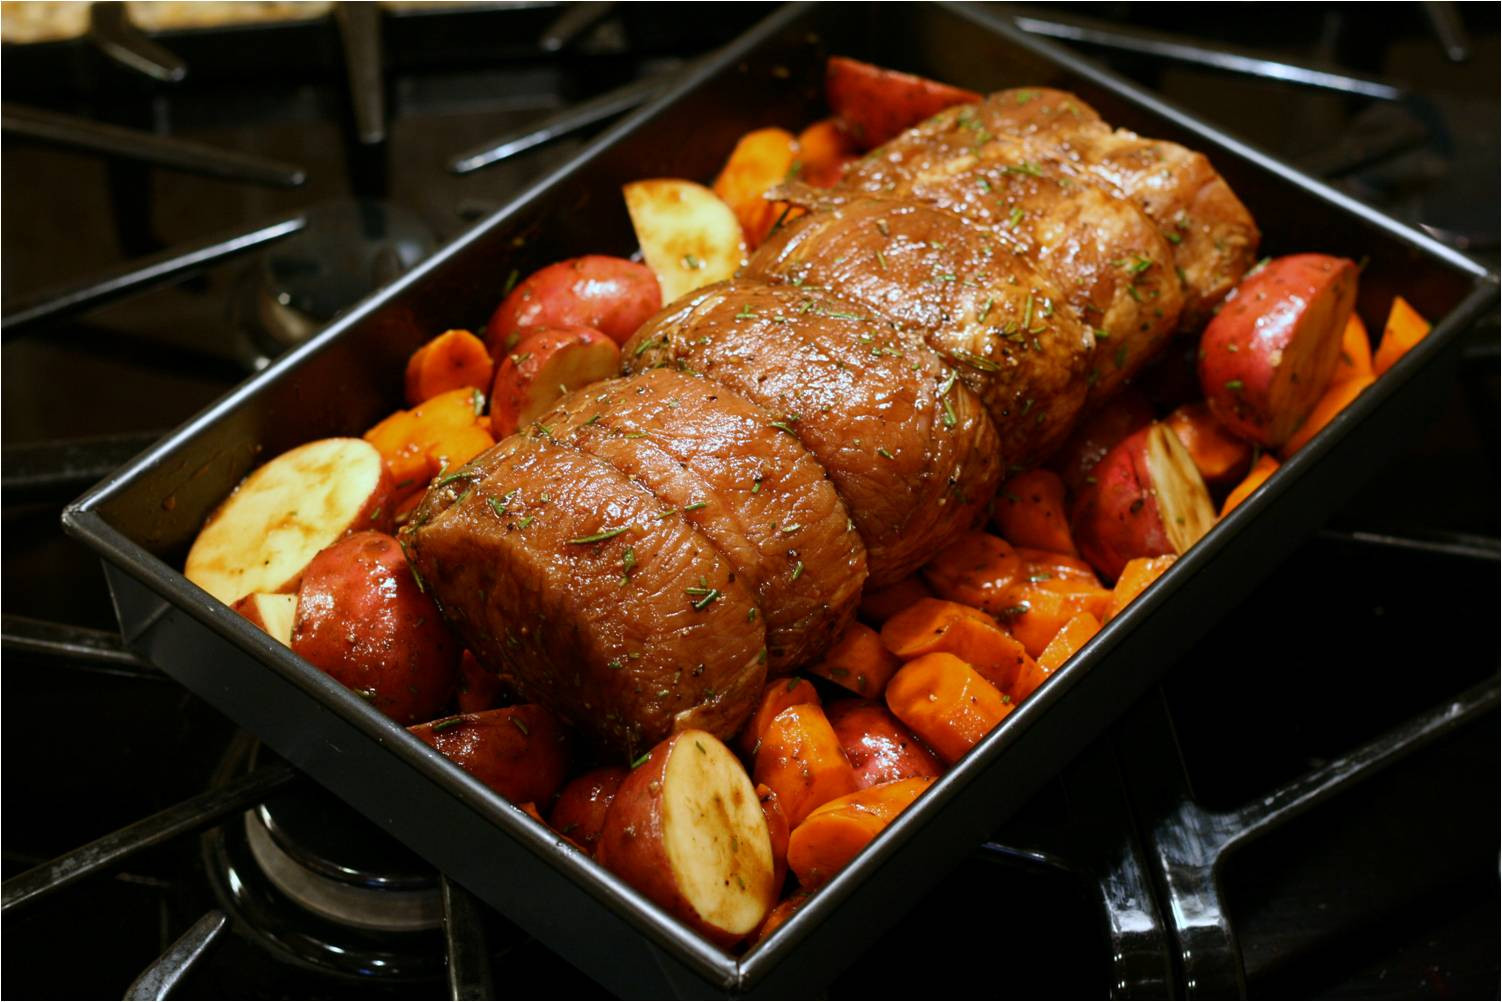 Pork Tenderloin In Oven
 Olive This – Recipe Fig Balsamic and Rosemary Roasted